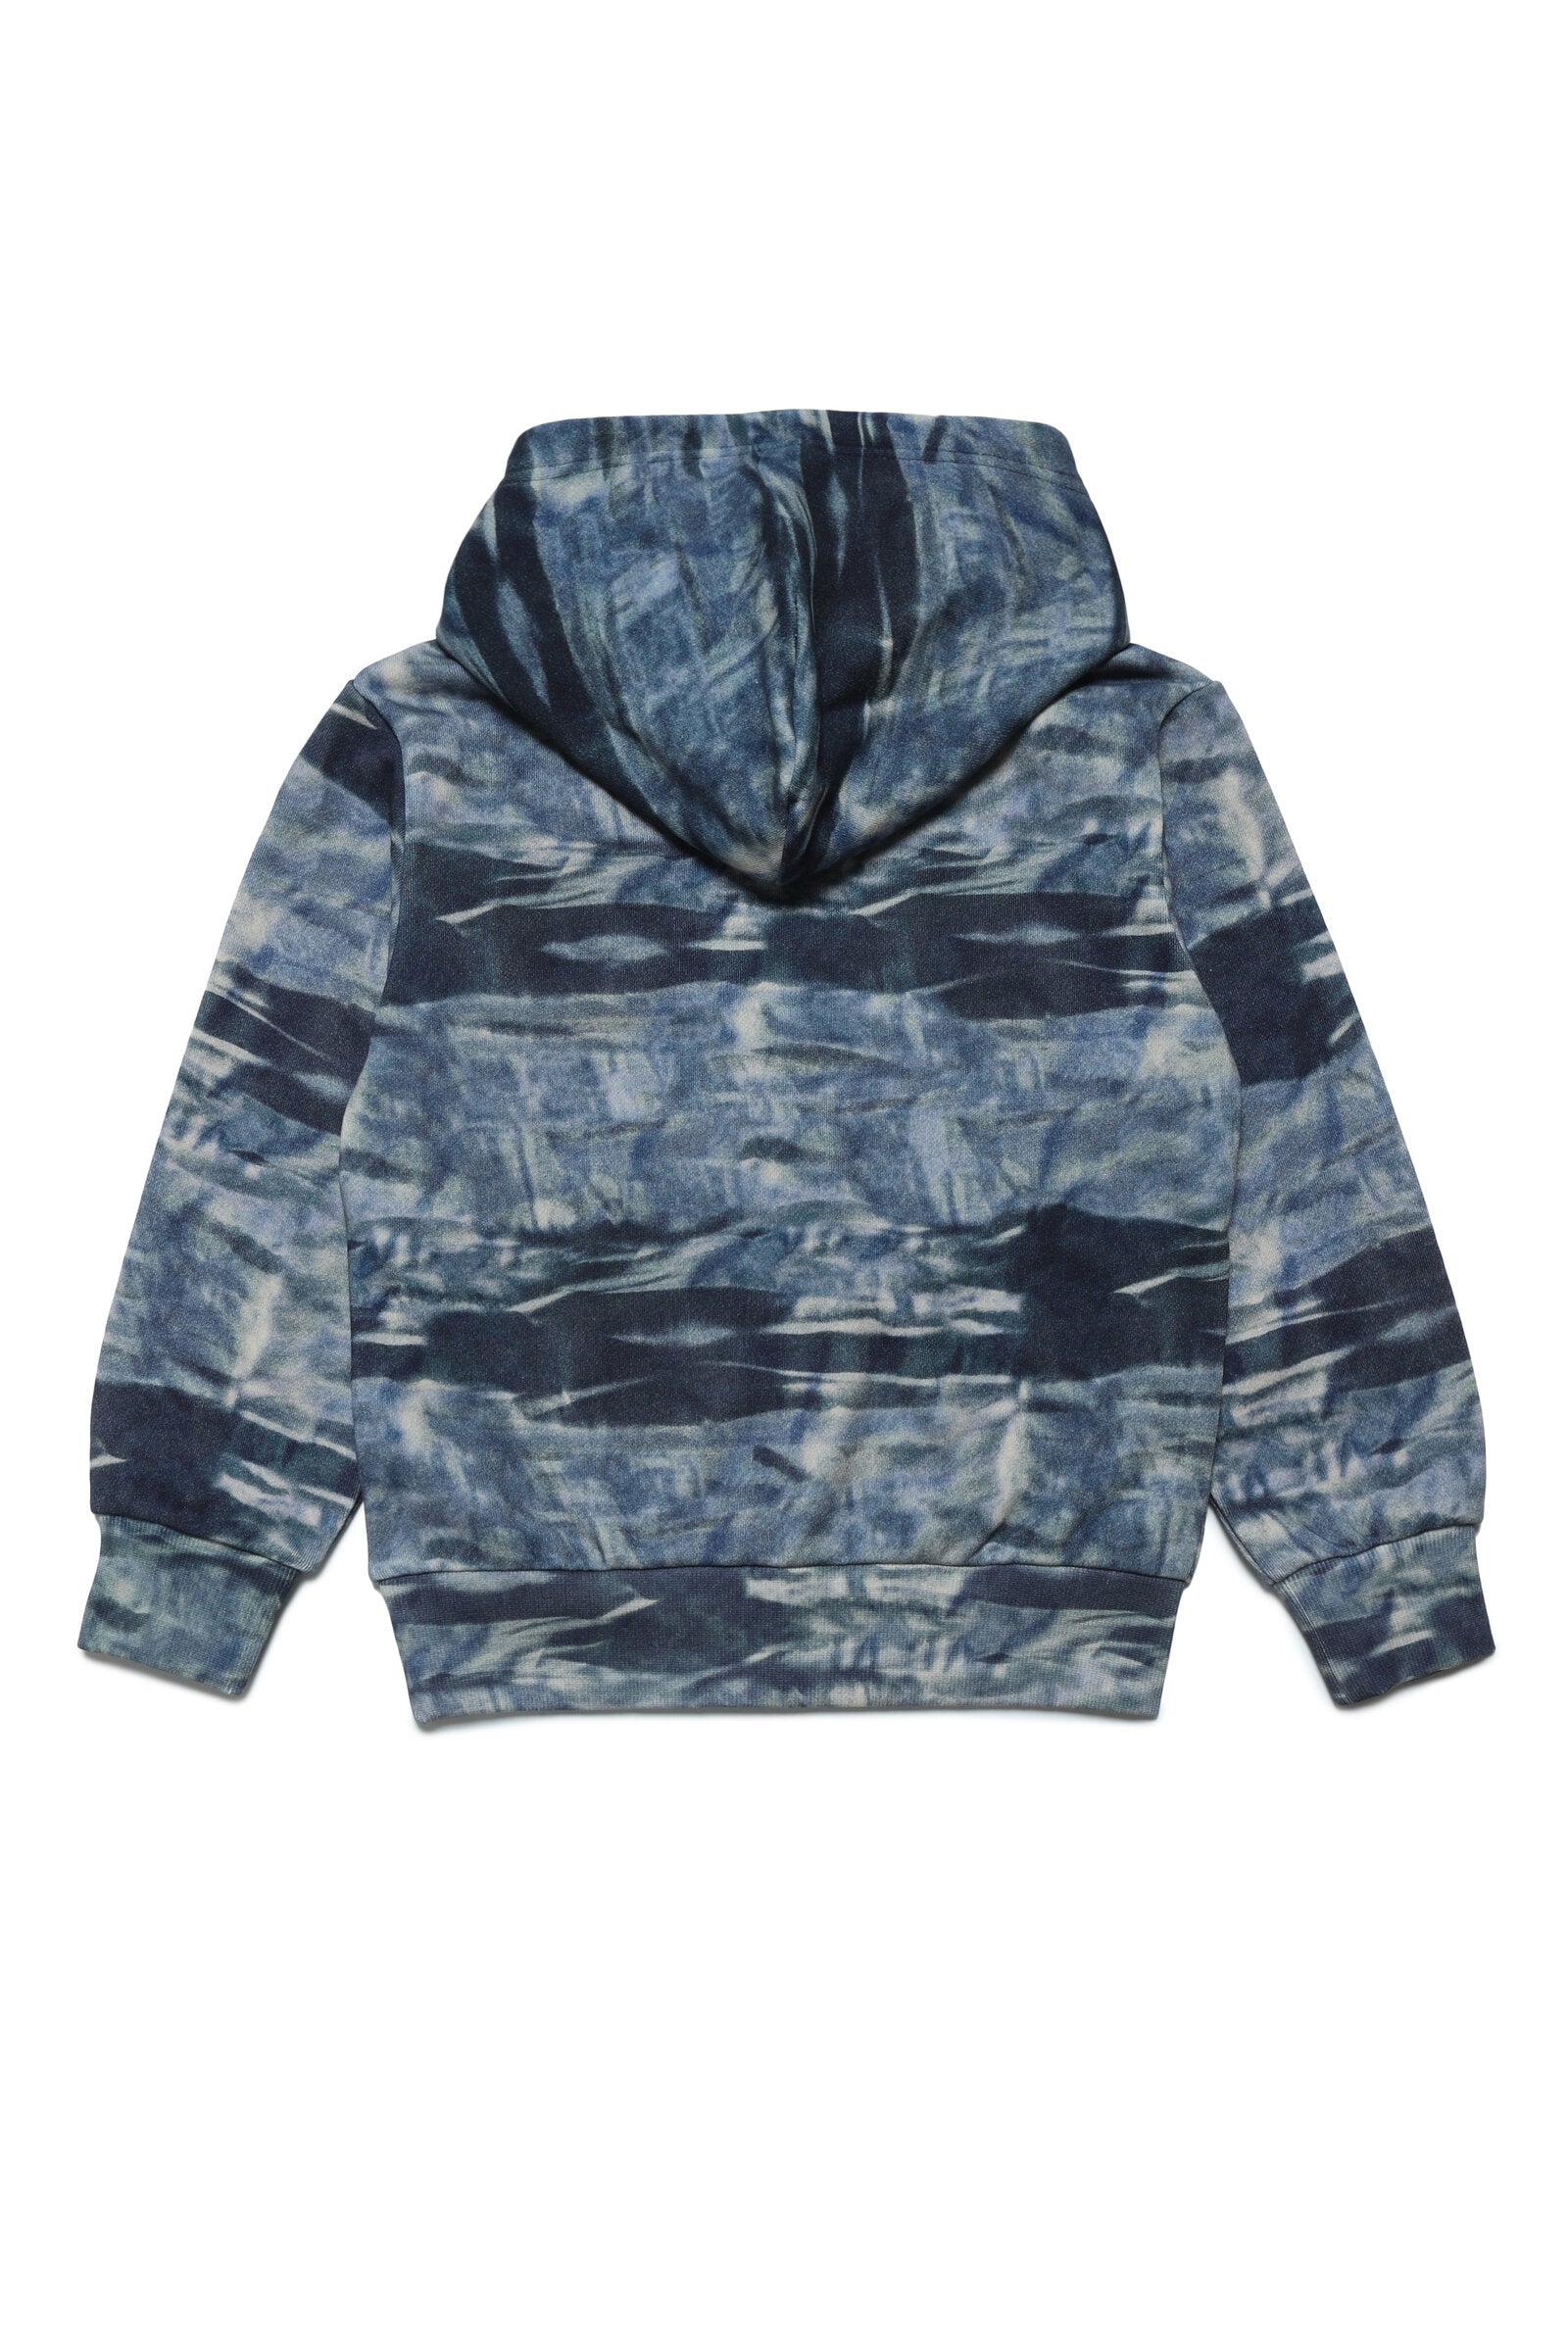 Hooded cotton sweatshirt with allover camouflage pattern and lettering